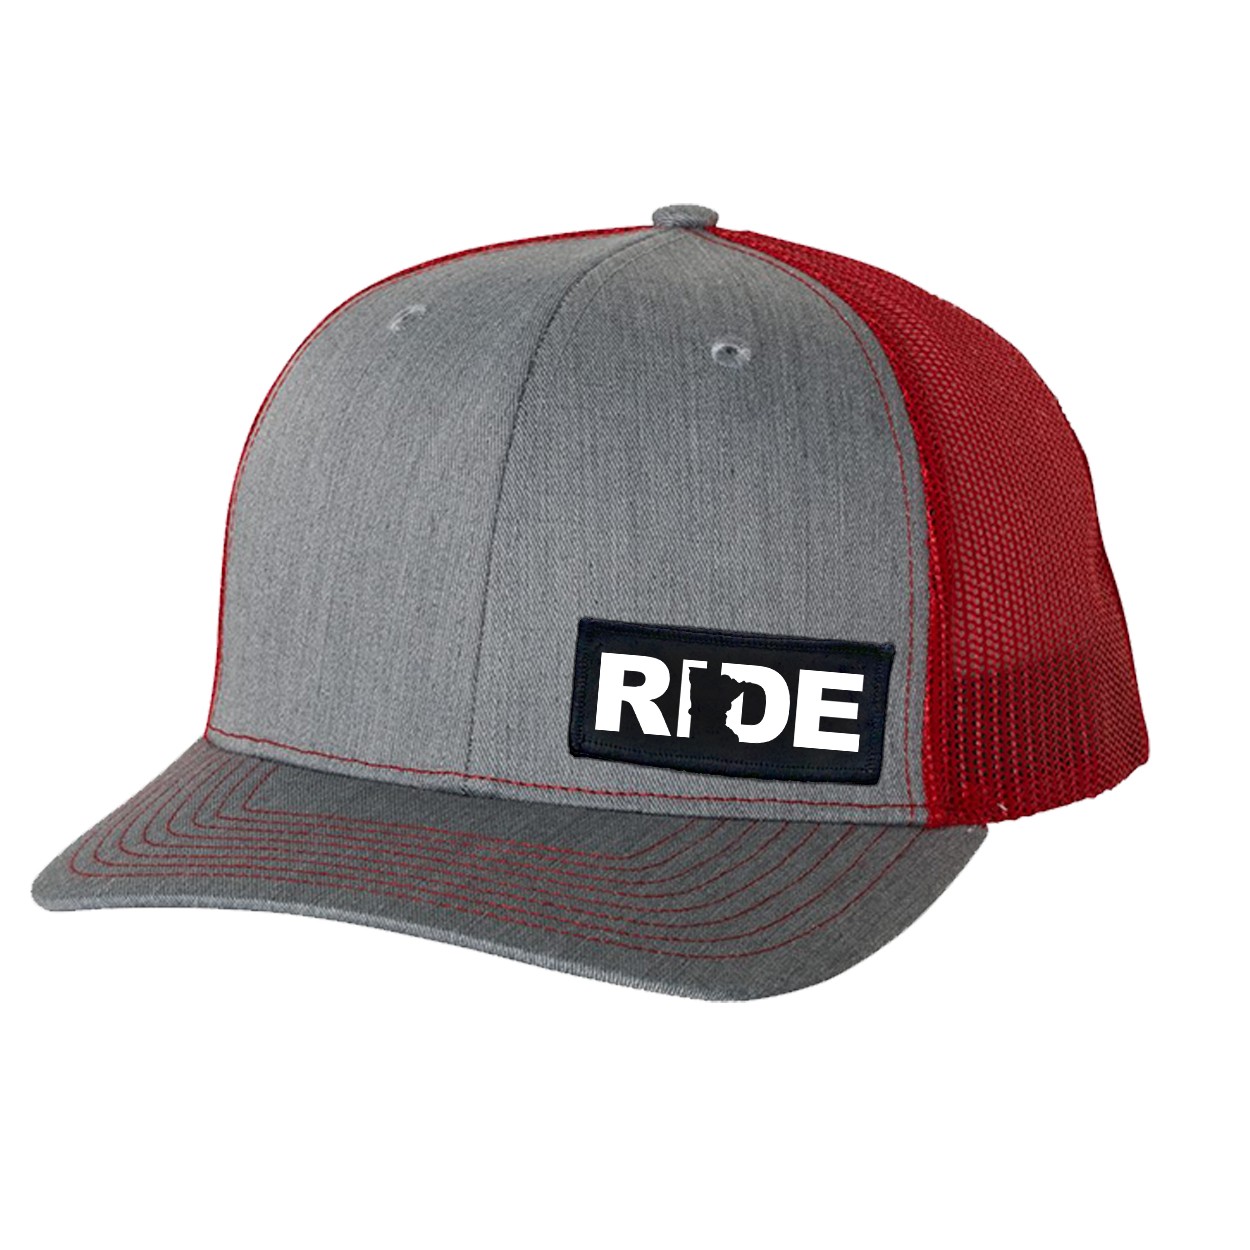 Ride Minnesota Night Out Woven Patch Snapback Trucker Hat Heather Heather Grey/Red (White Logo)